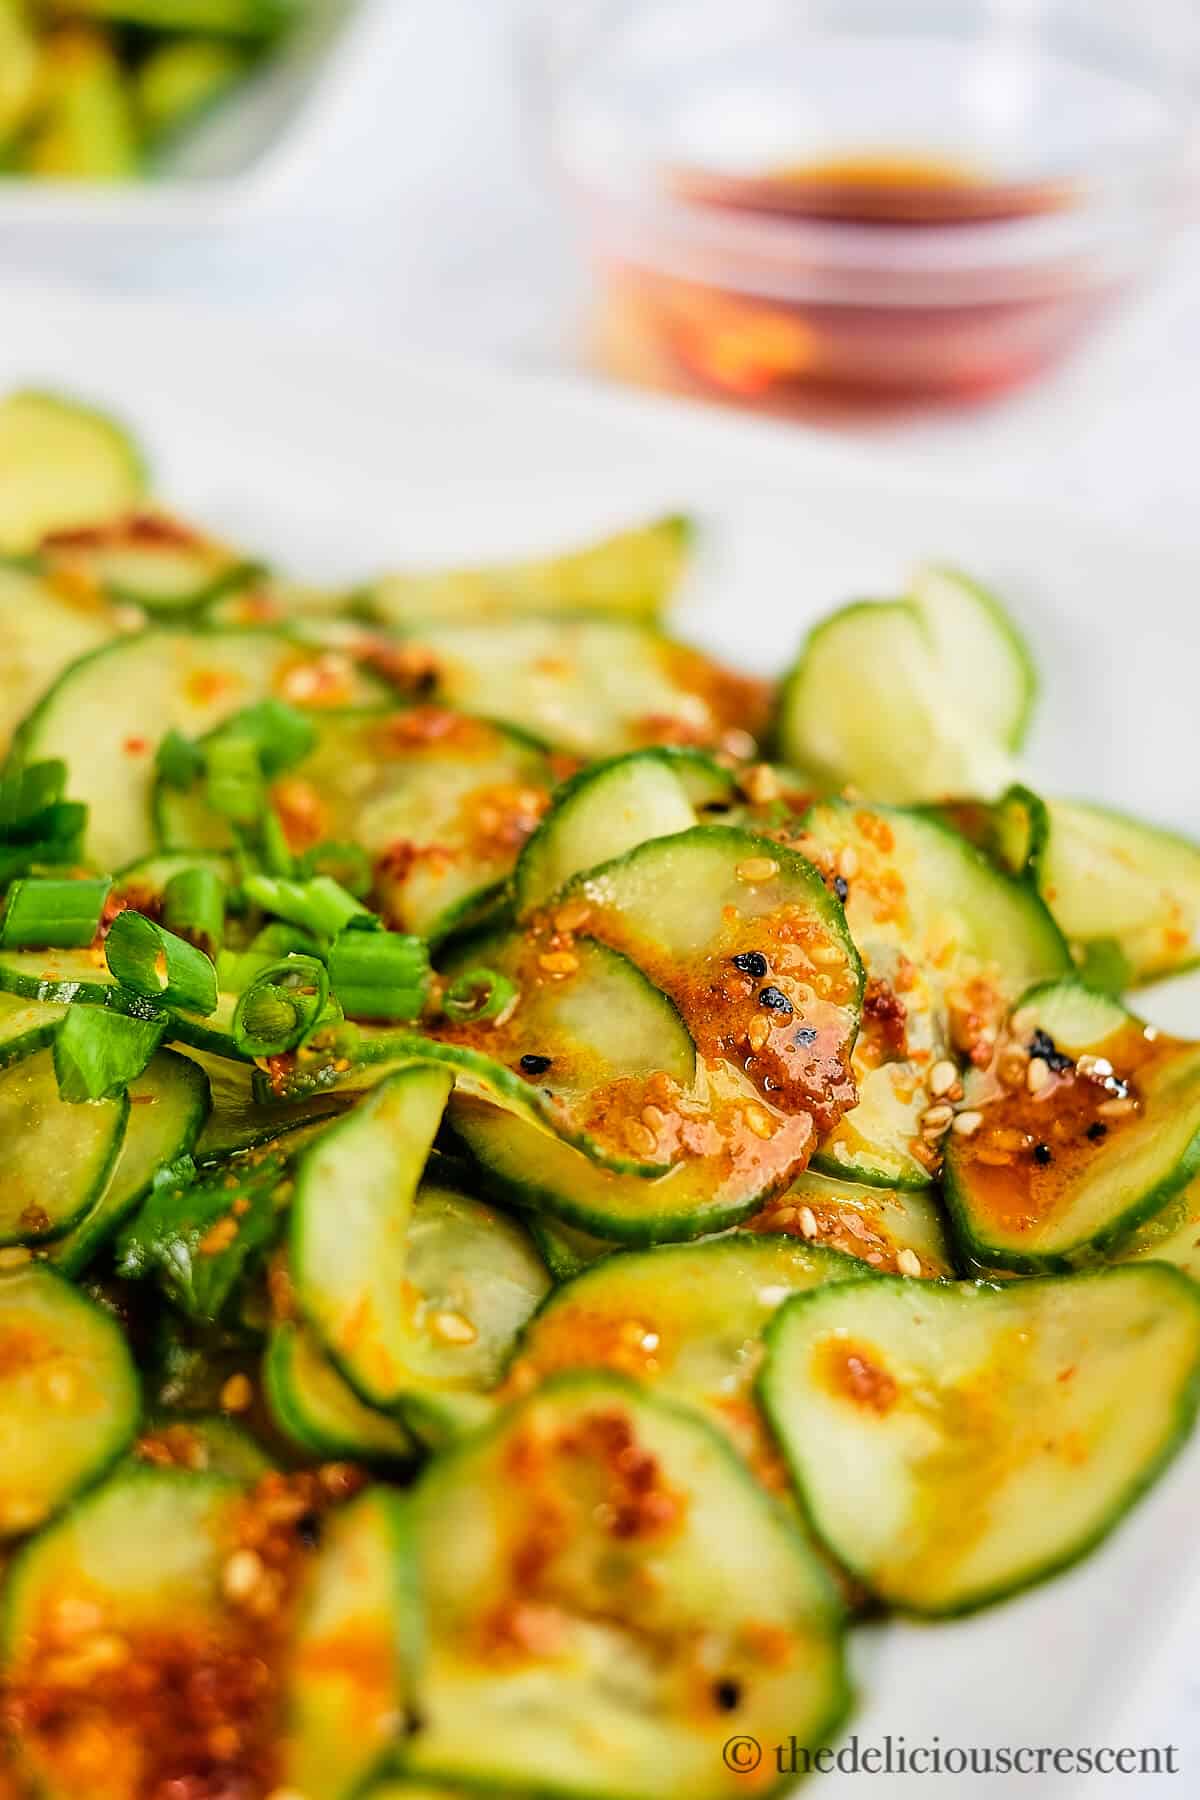 Pickled cucumber salad prepared in Asian style and served in a plate.